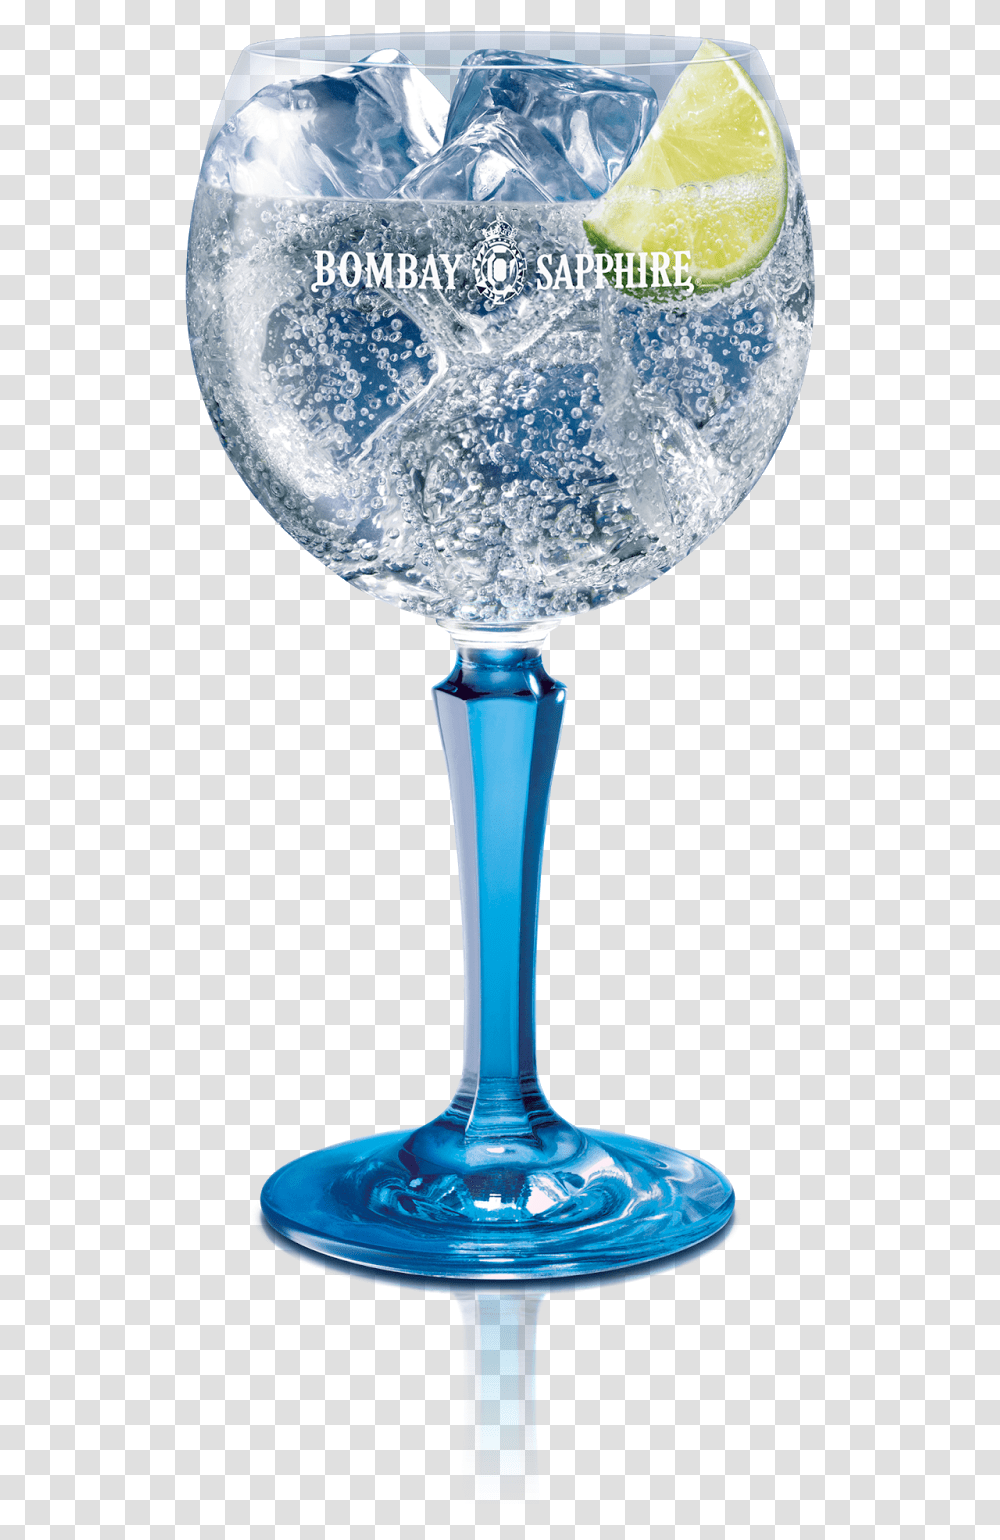 Bombay Sapphire Amp Tonic, Lamp, Glass, Crystal, Beverage Transparent Png